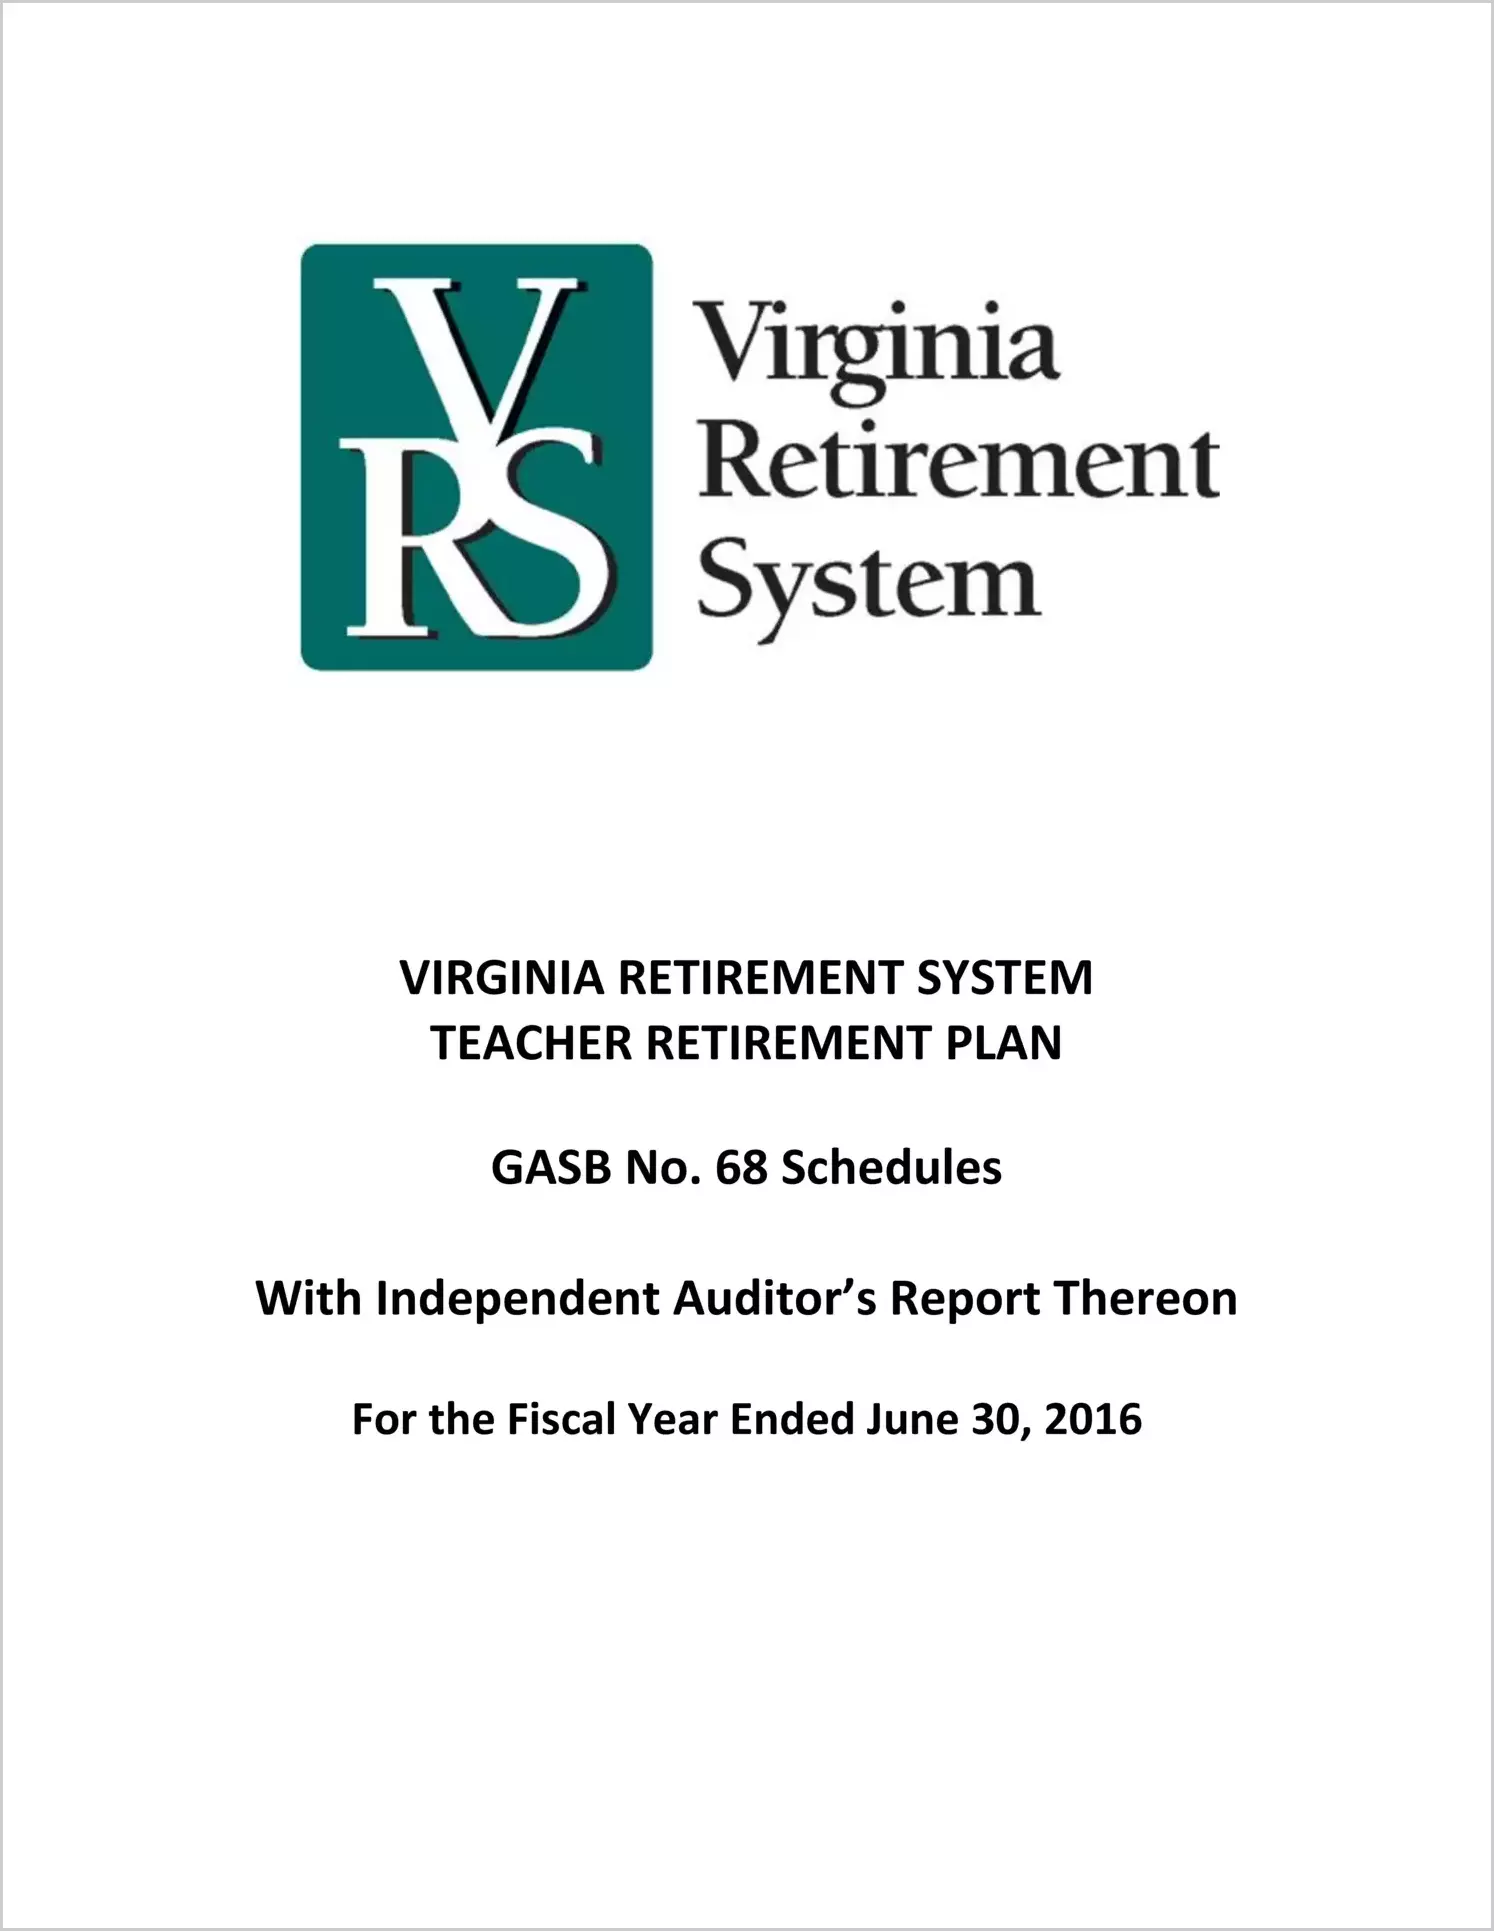 GASB 68 Schedule - Teacher Retirement Plan for the year ended June 30, 2016